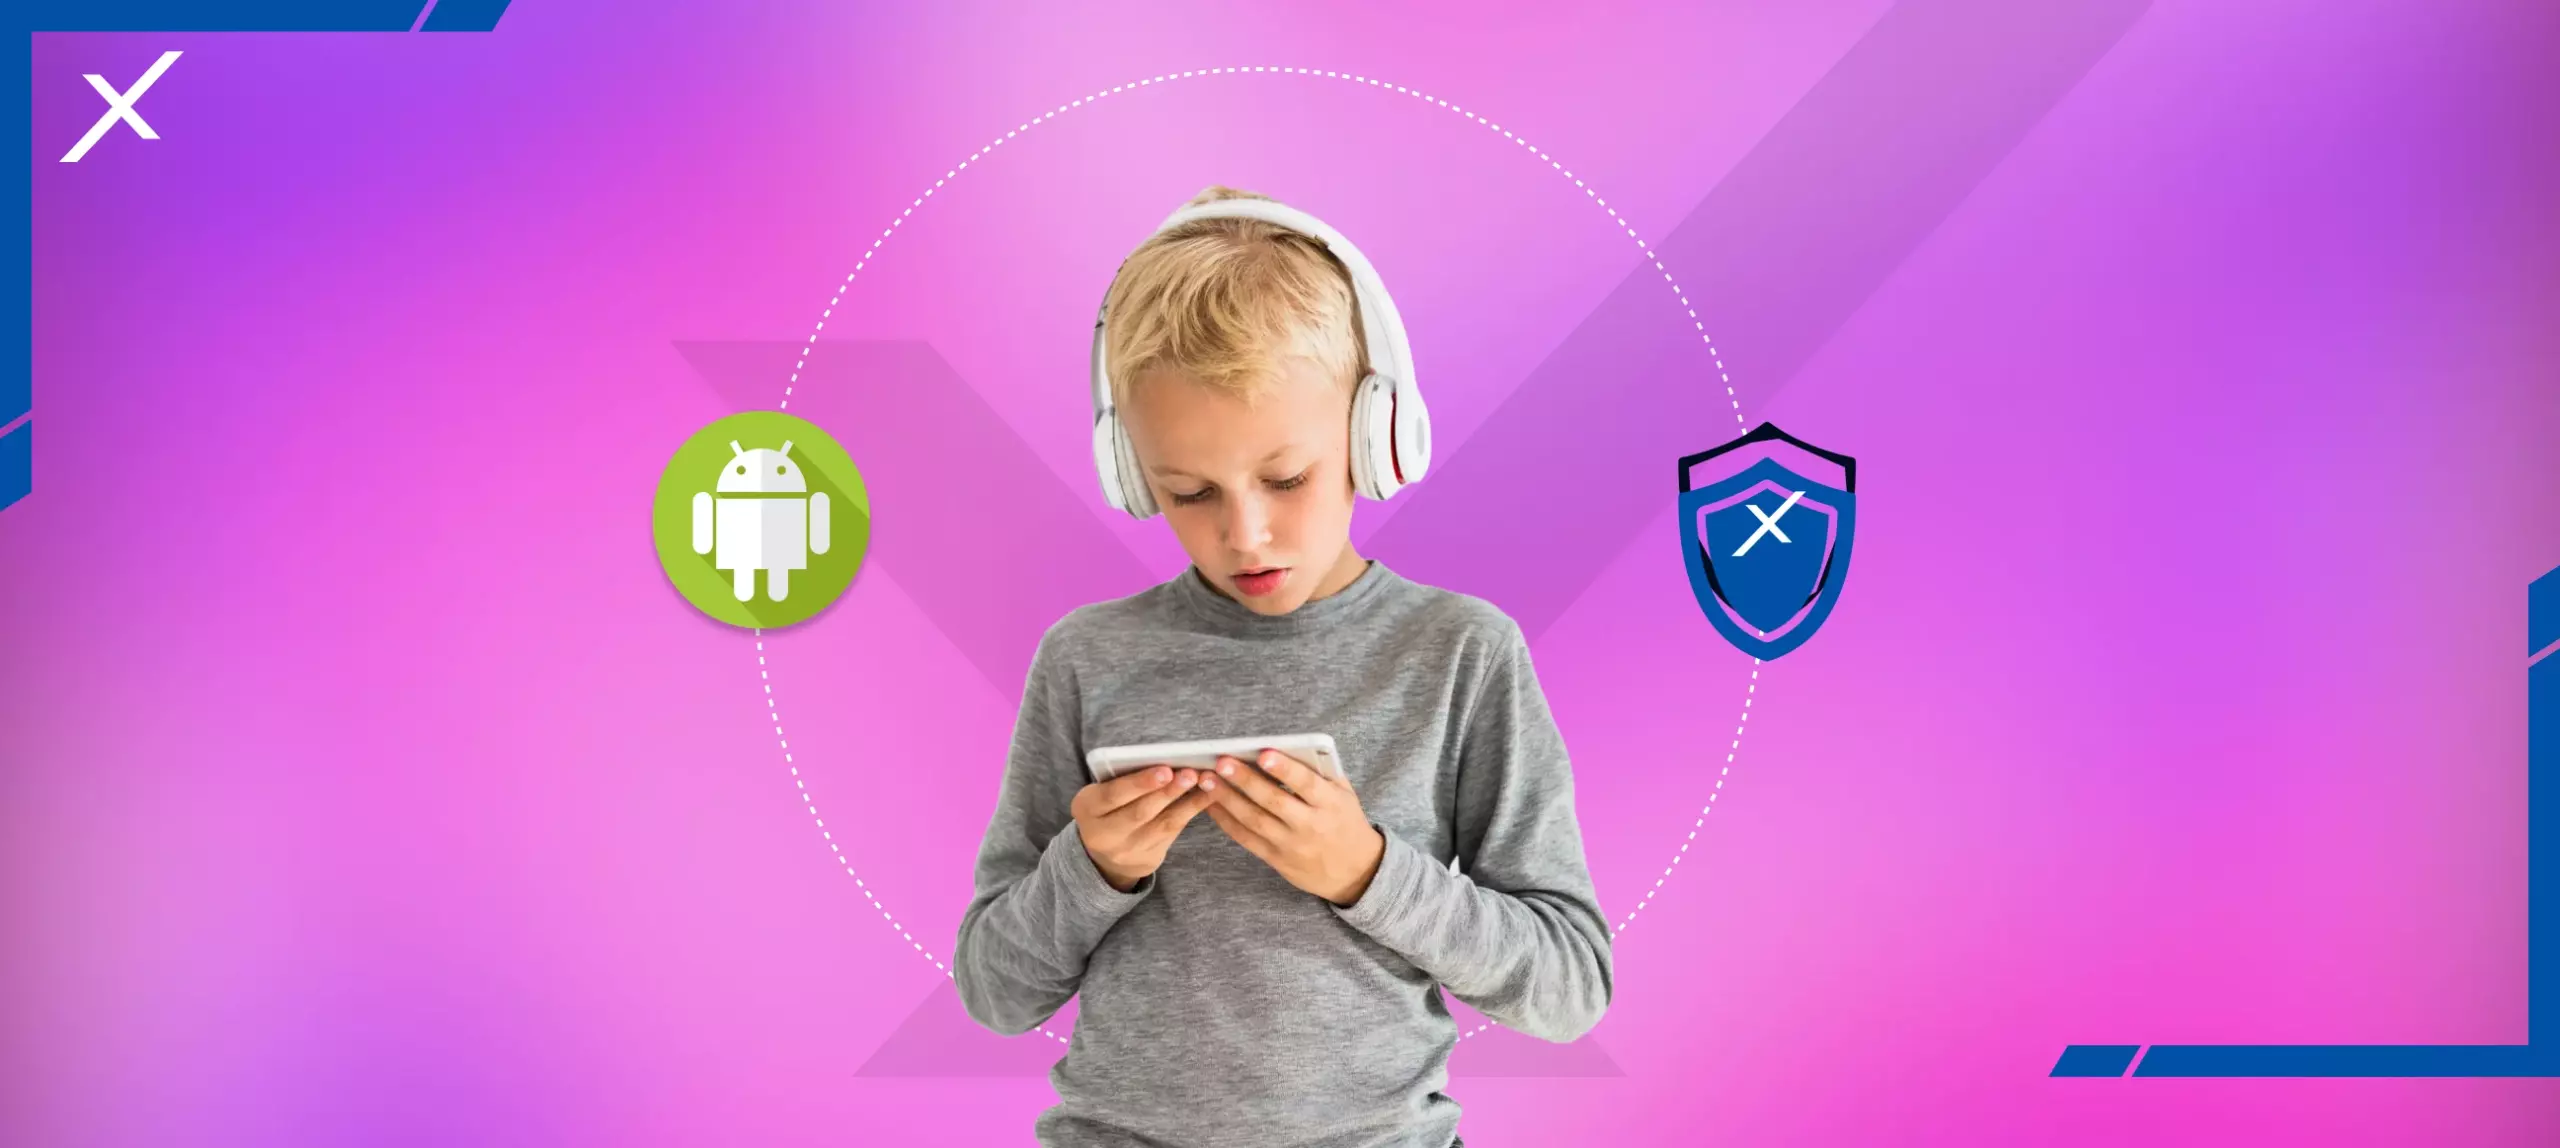 NexaSpy Phone Tracker App for Android - How to Use it for Kids' Safety?